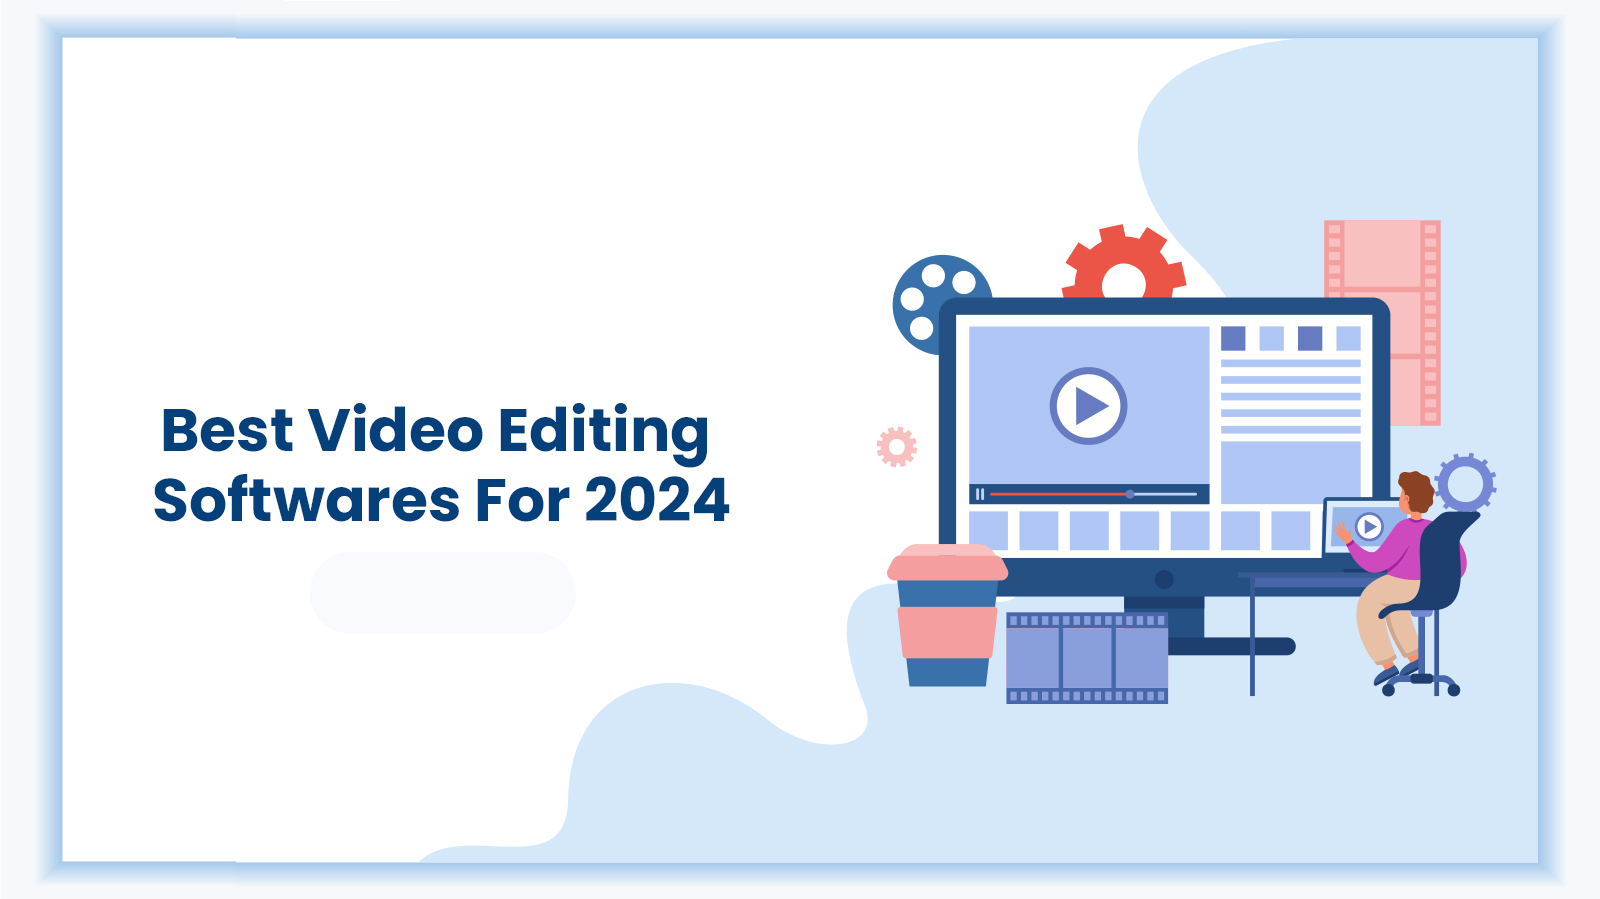 Display image for the blog- Best Video Editing Softwares